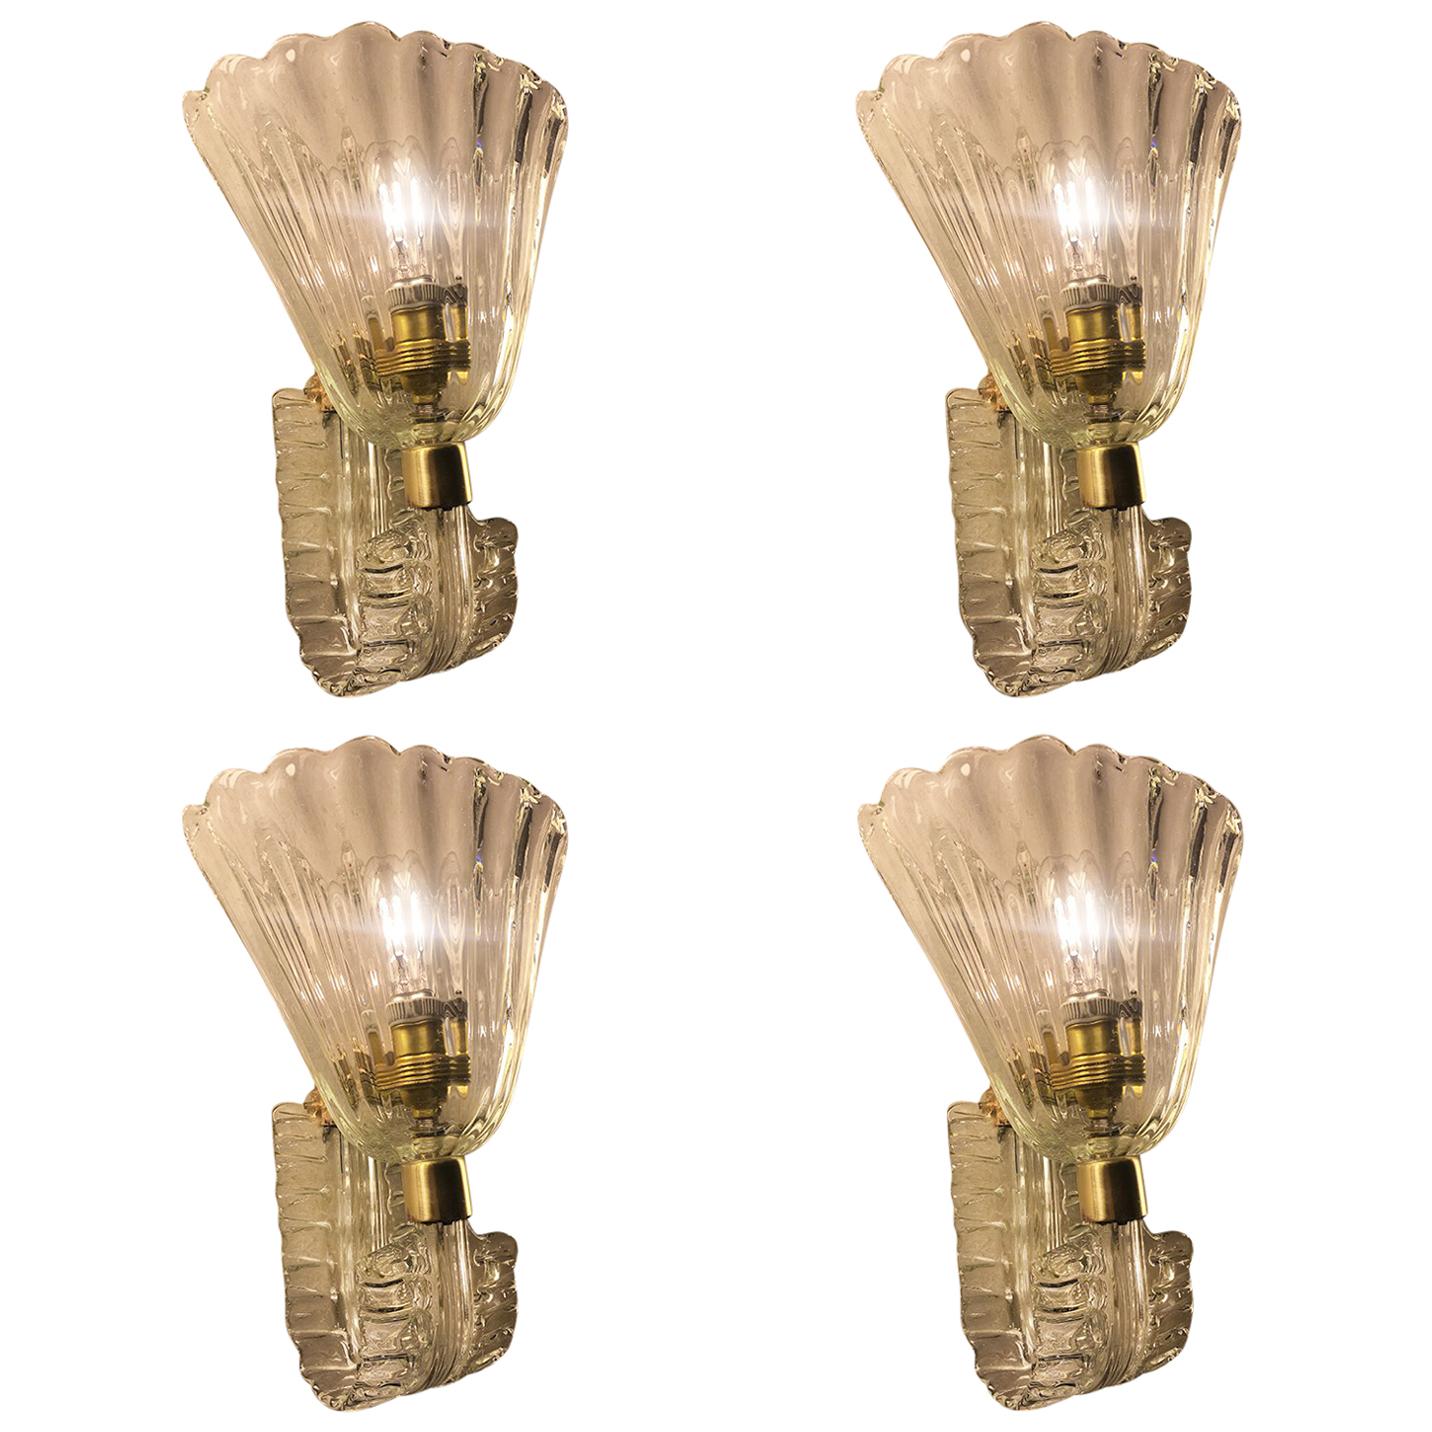 A spectacular pair of Barovier & Toso sconces. Each sconce has one light and brass hardware.